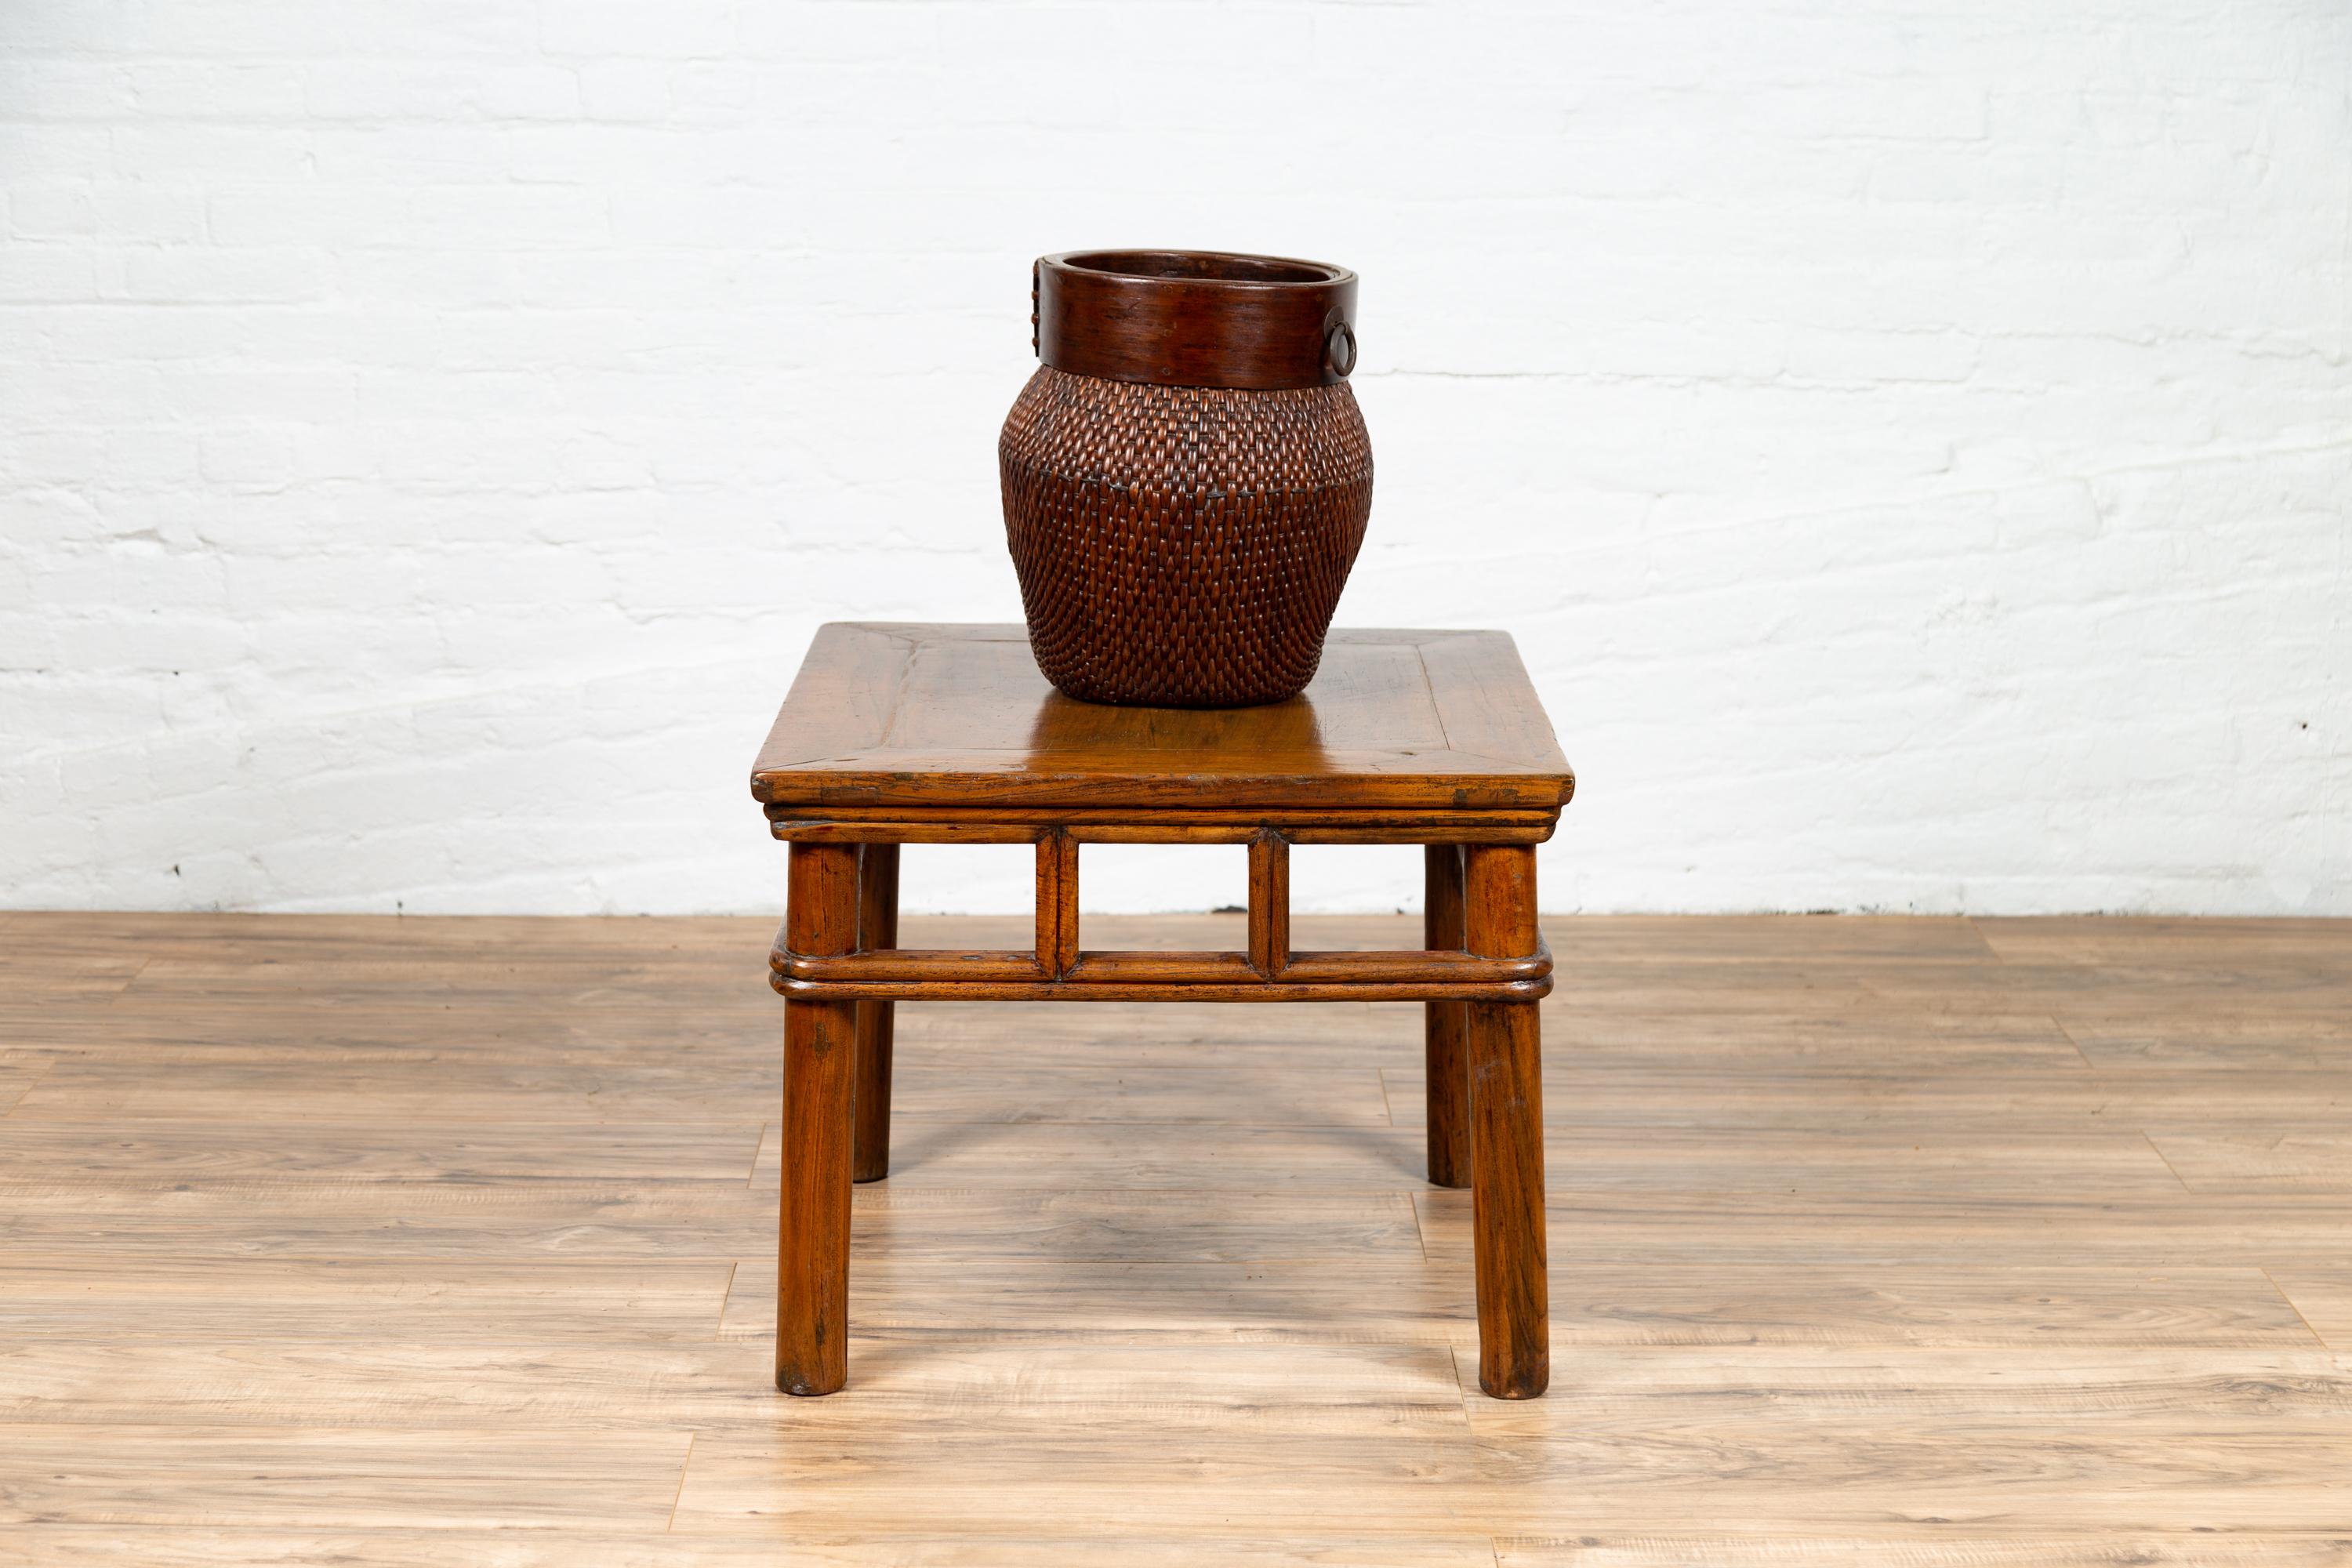 A Chinese Qing dynasty style elmwood side table from the early 20th century, with pierced pillar-shaped struts apron and cylindrical legs. This elegant Chinese side table features a rectangular top with central board and beveled edges, sitting above